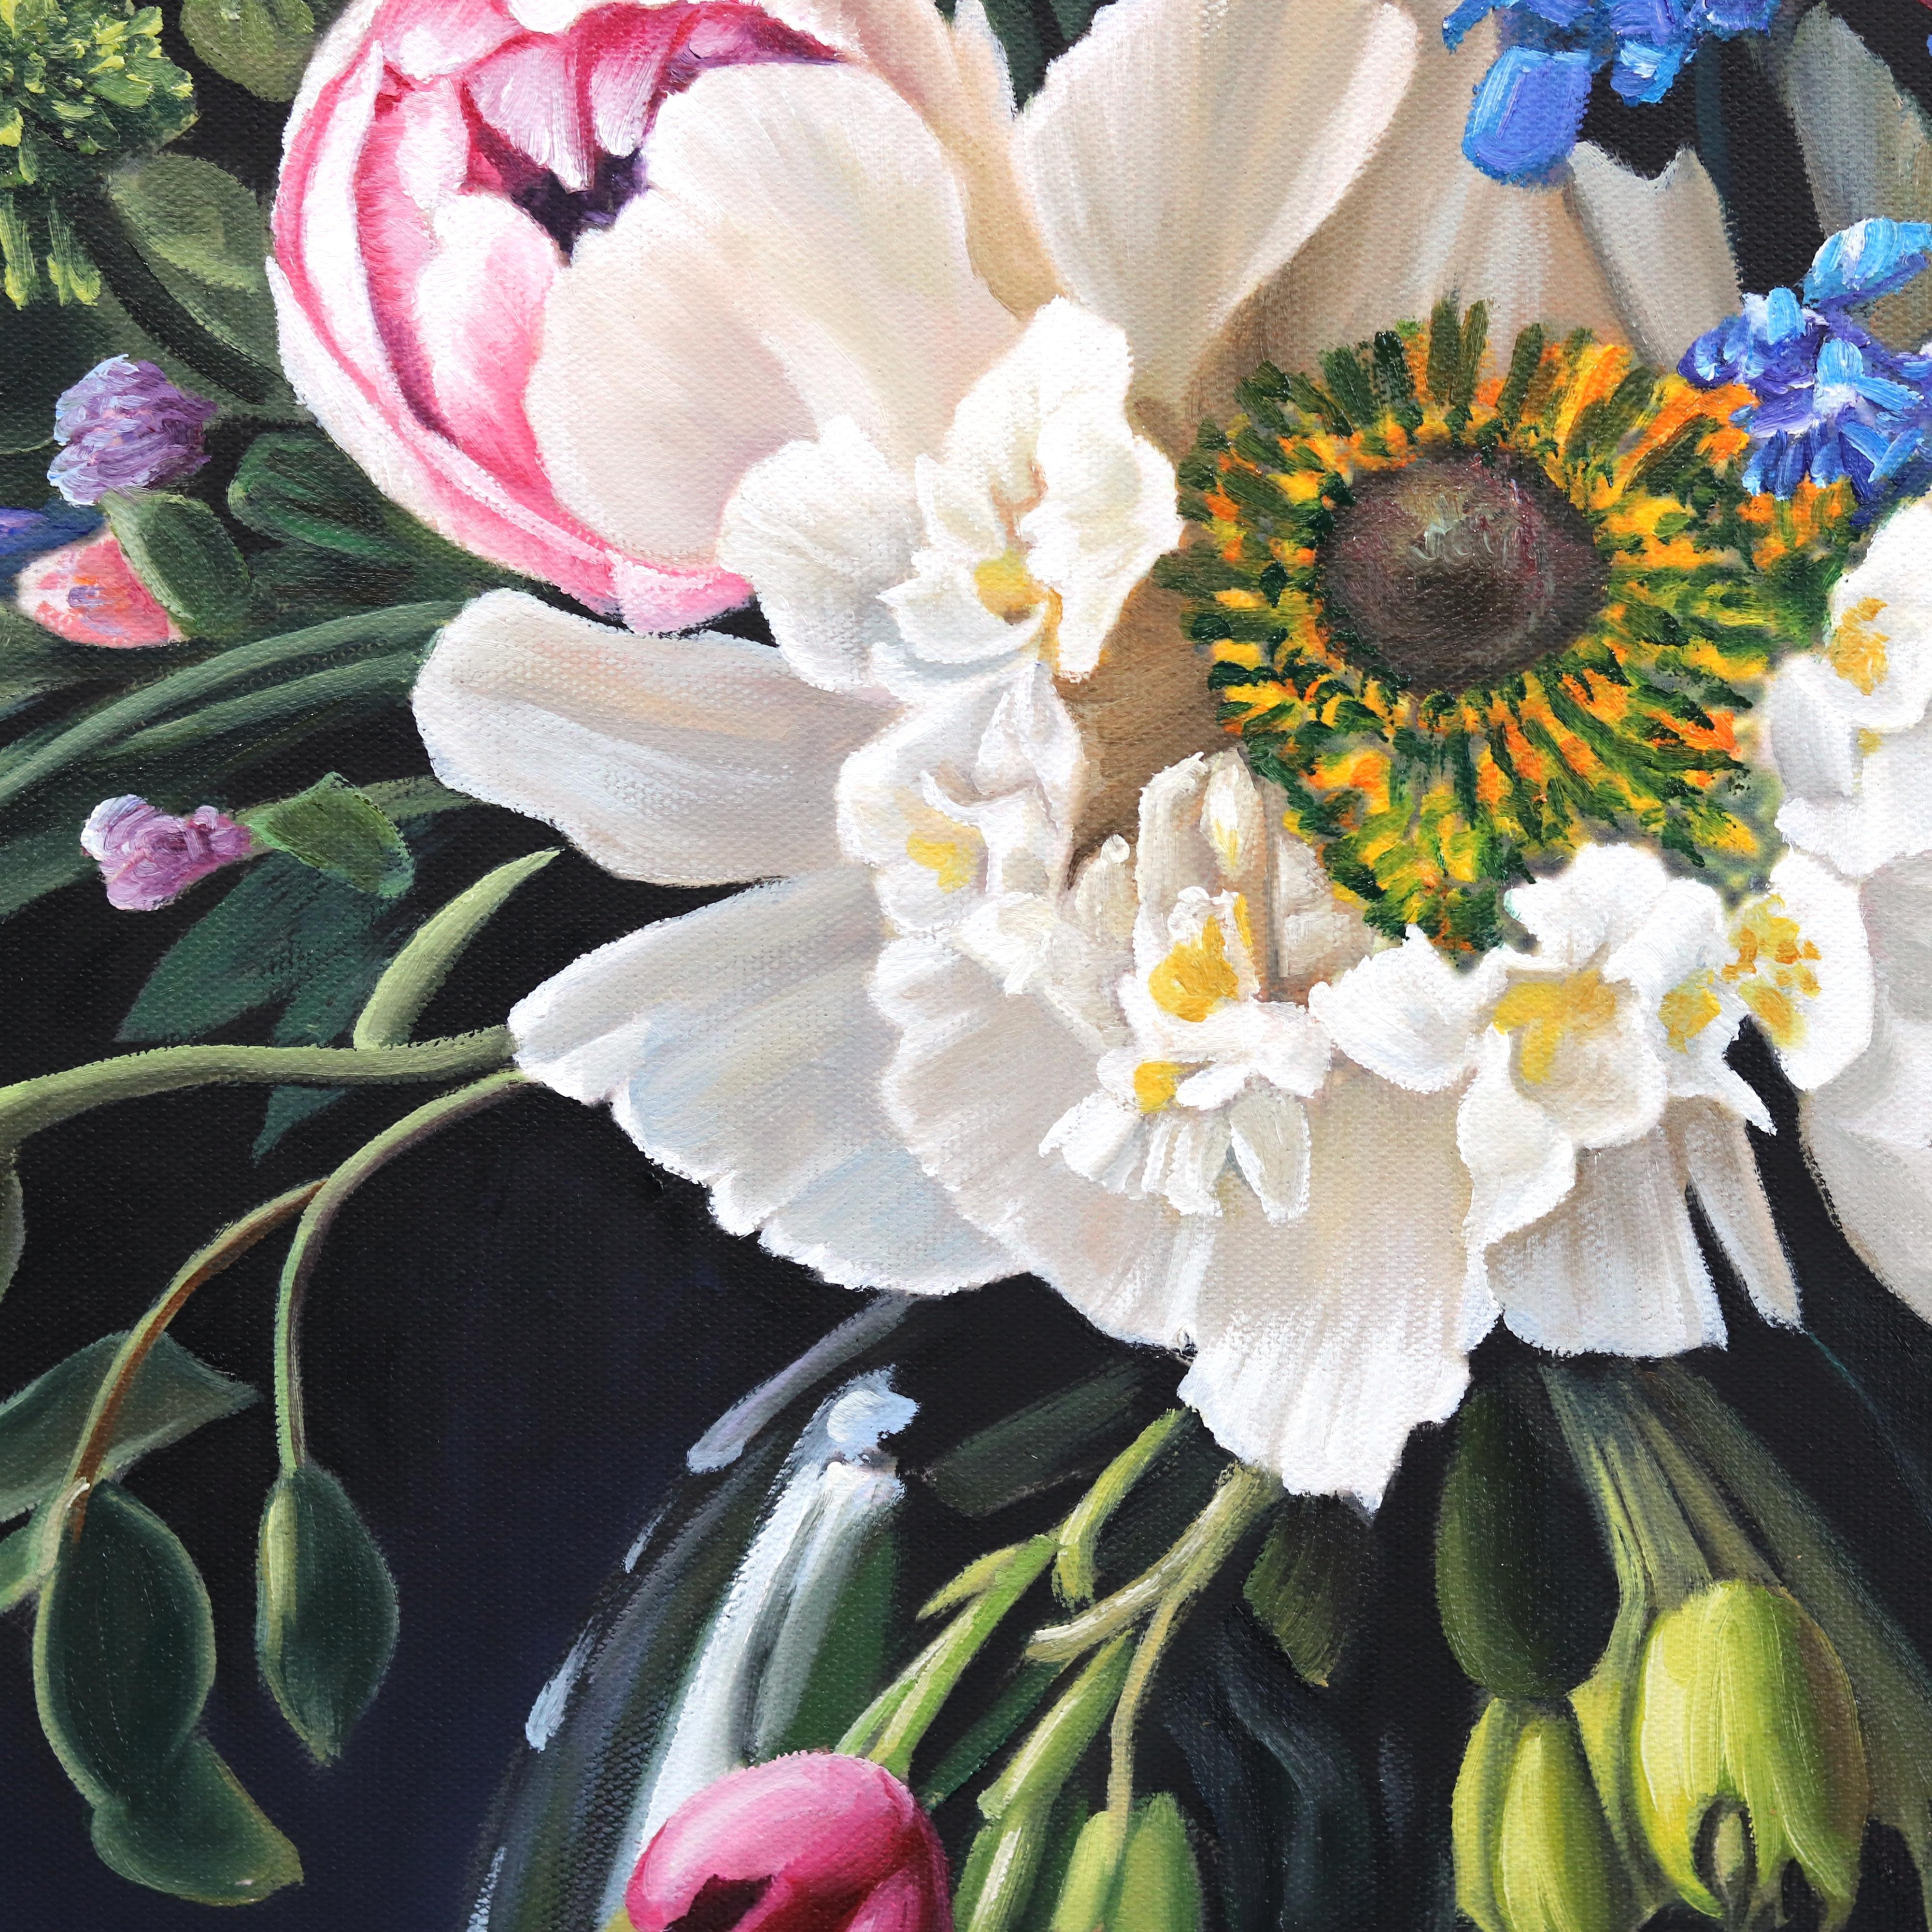 I Have Only My Dreams - Hyperrealist Botanical Floral Still Life Oil Painting 8